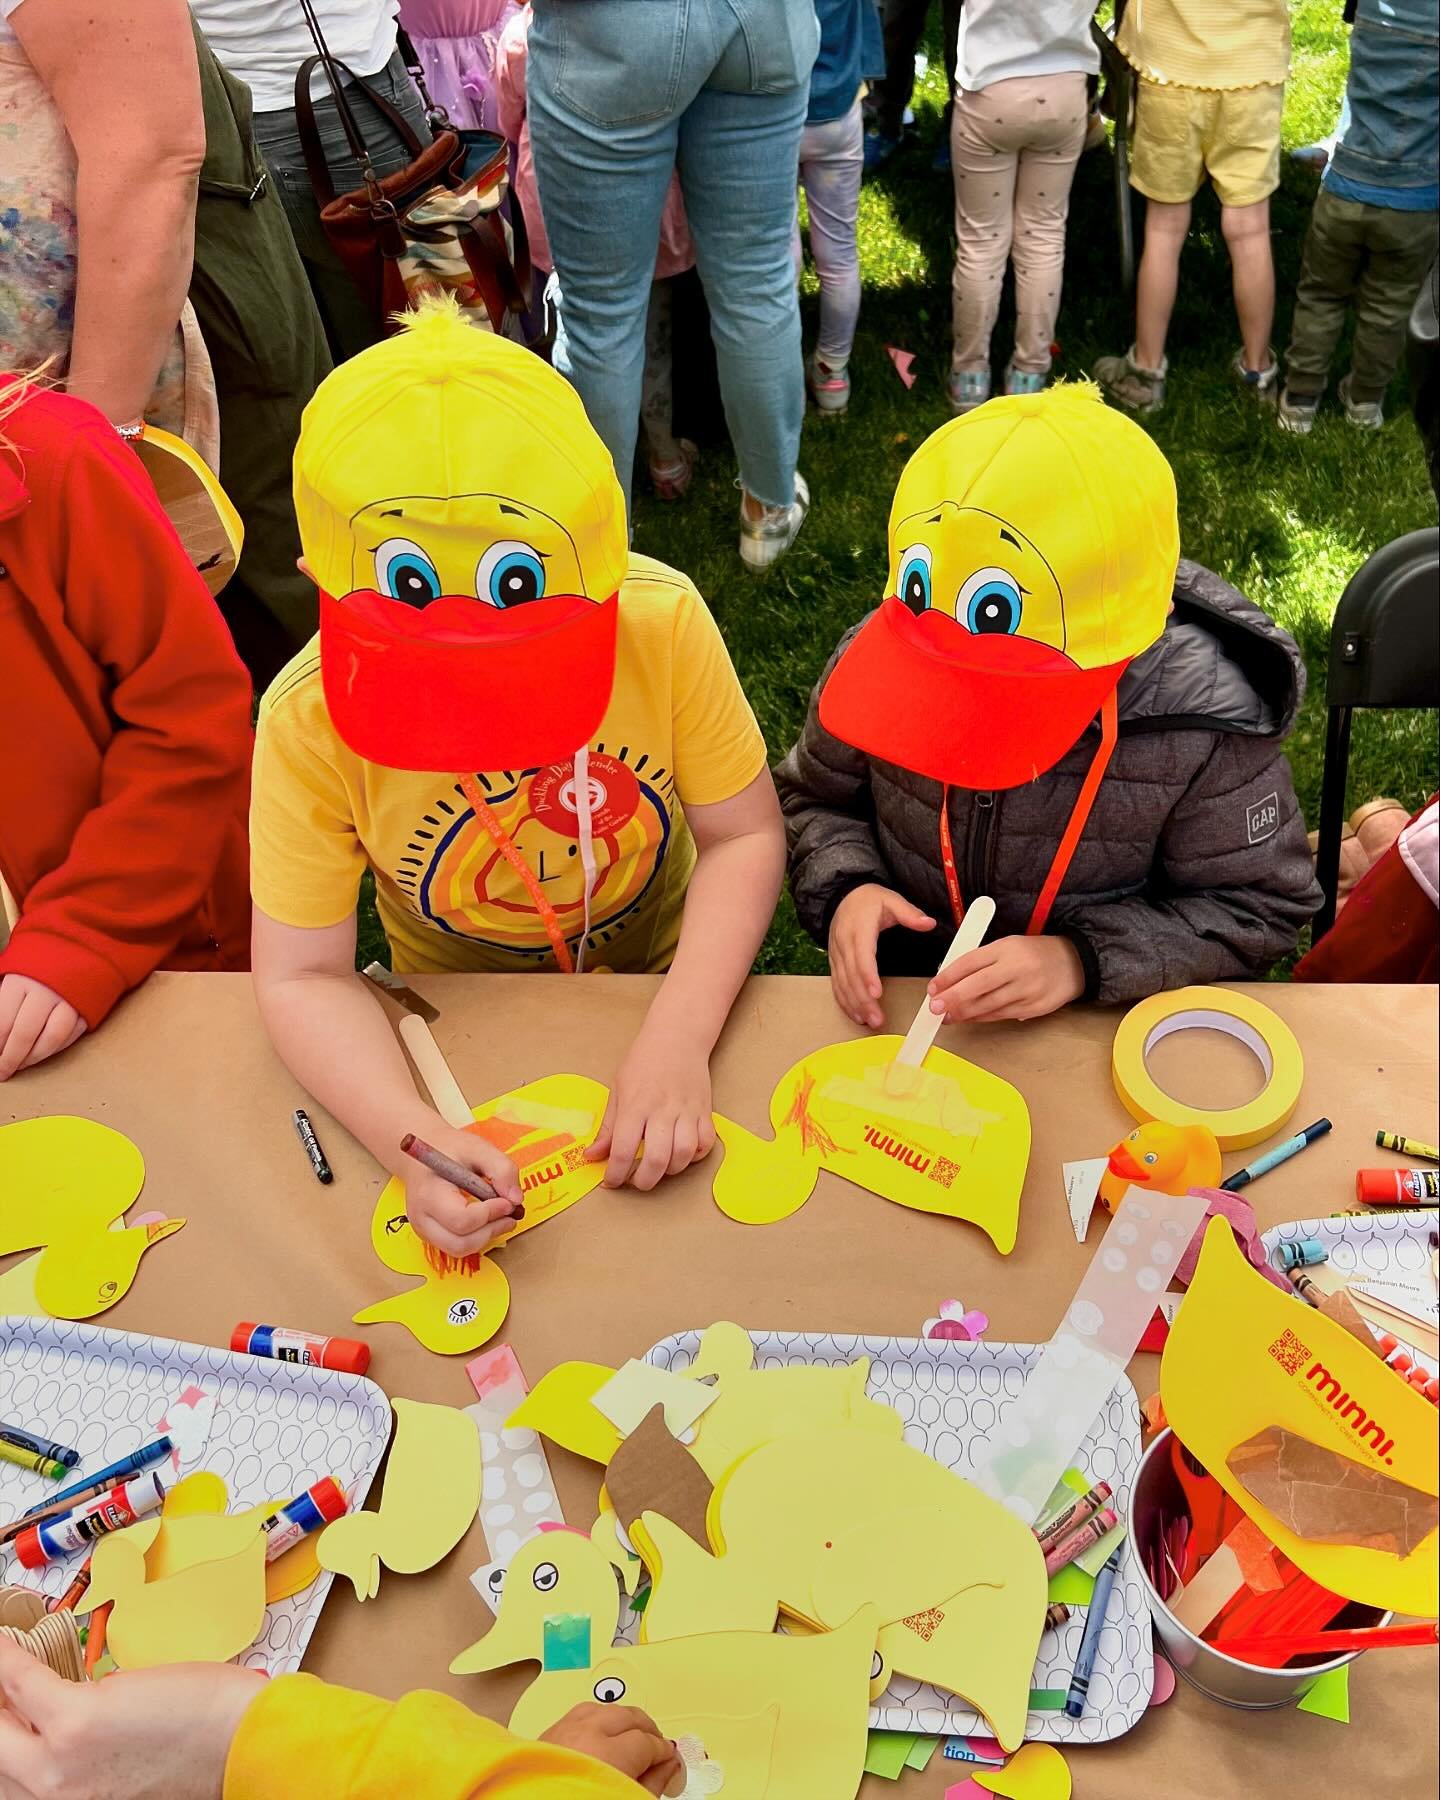 *GIVEAWAY* 🐥🐥🐥🐥
Minni is excited to be participating in this year&rsquo;s Duckling Day celebrations! In honor of our partnership with Friends of the Public Garden @friendsofthepublicgarden we are giving away ONE free ticket to the event! You only